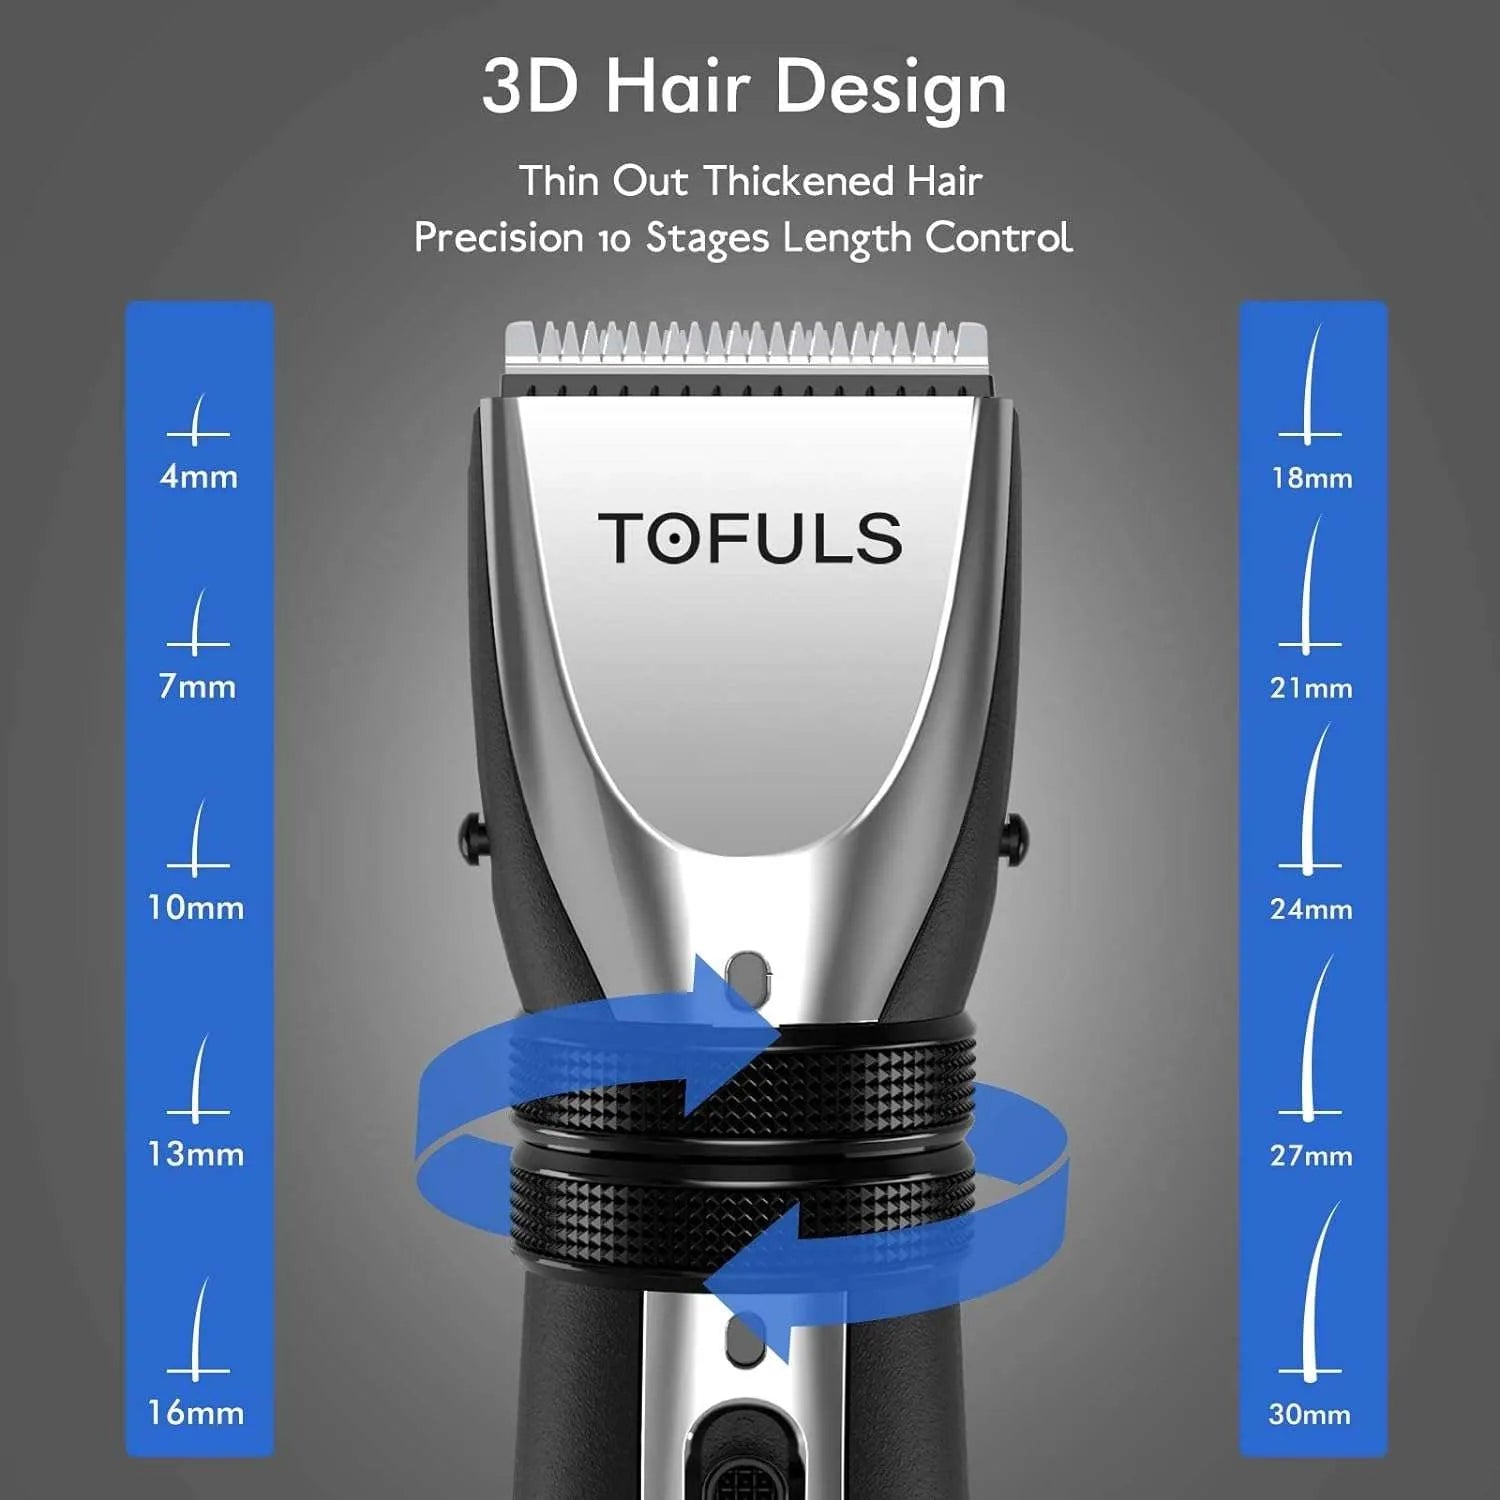 TOFULS Men’s Hair Trimmer Rechargeable Precision Hair Cutting Kit with Extra Blade | Amazon lot Imported